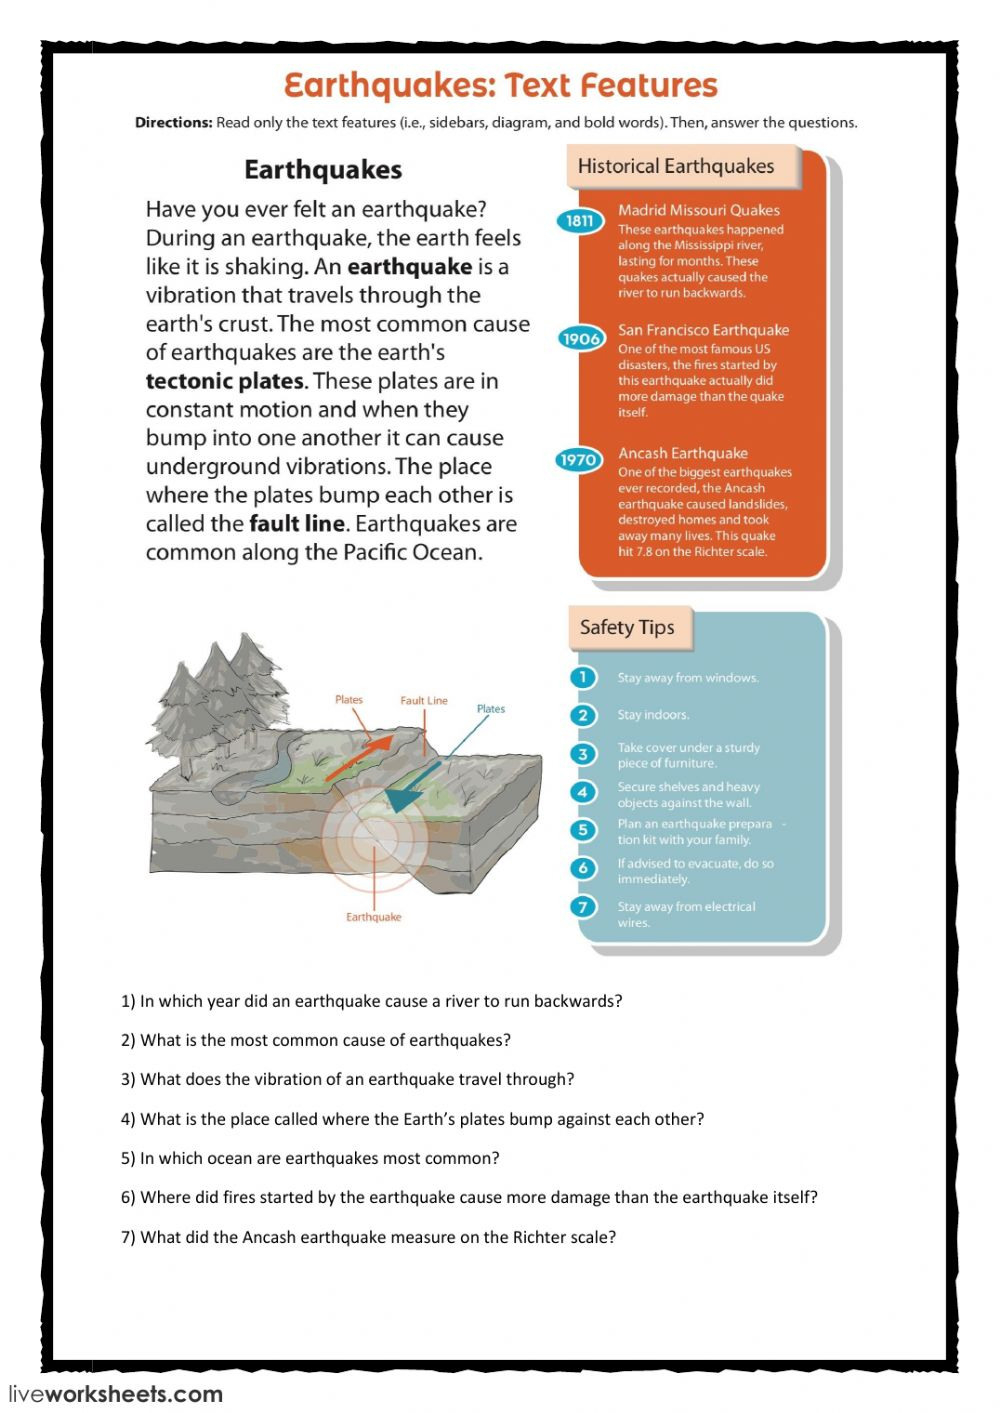 earthquakes-interactive-worksheet-db-excel